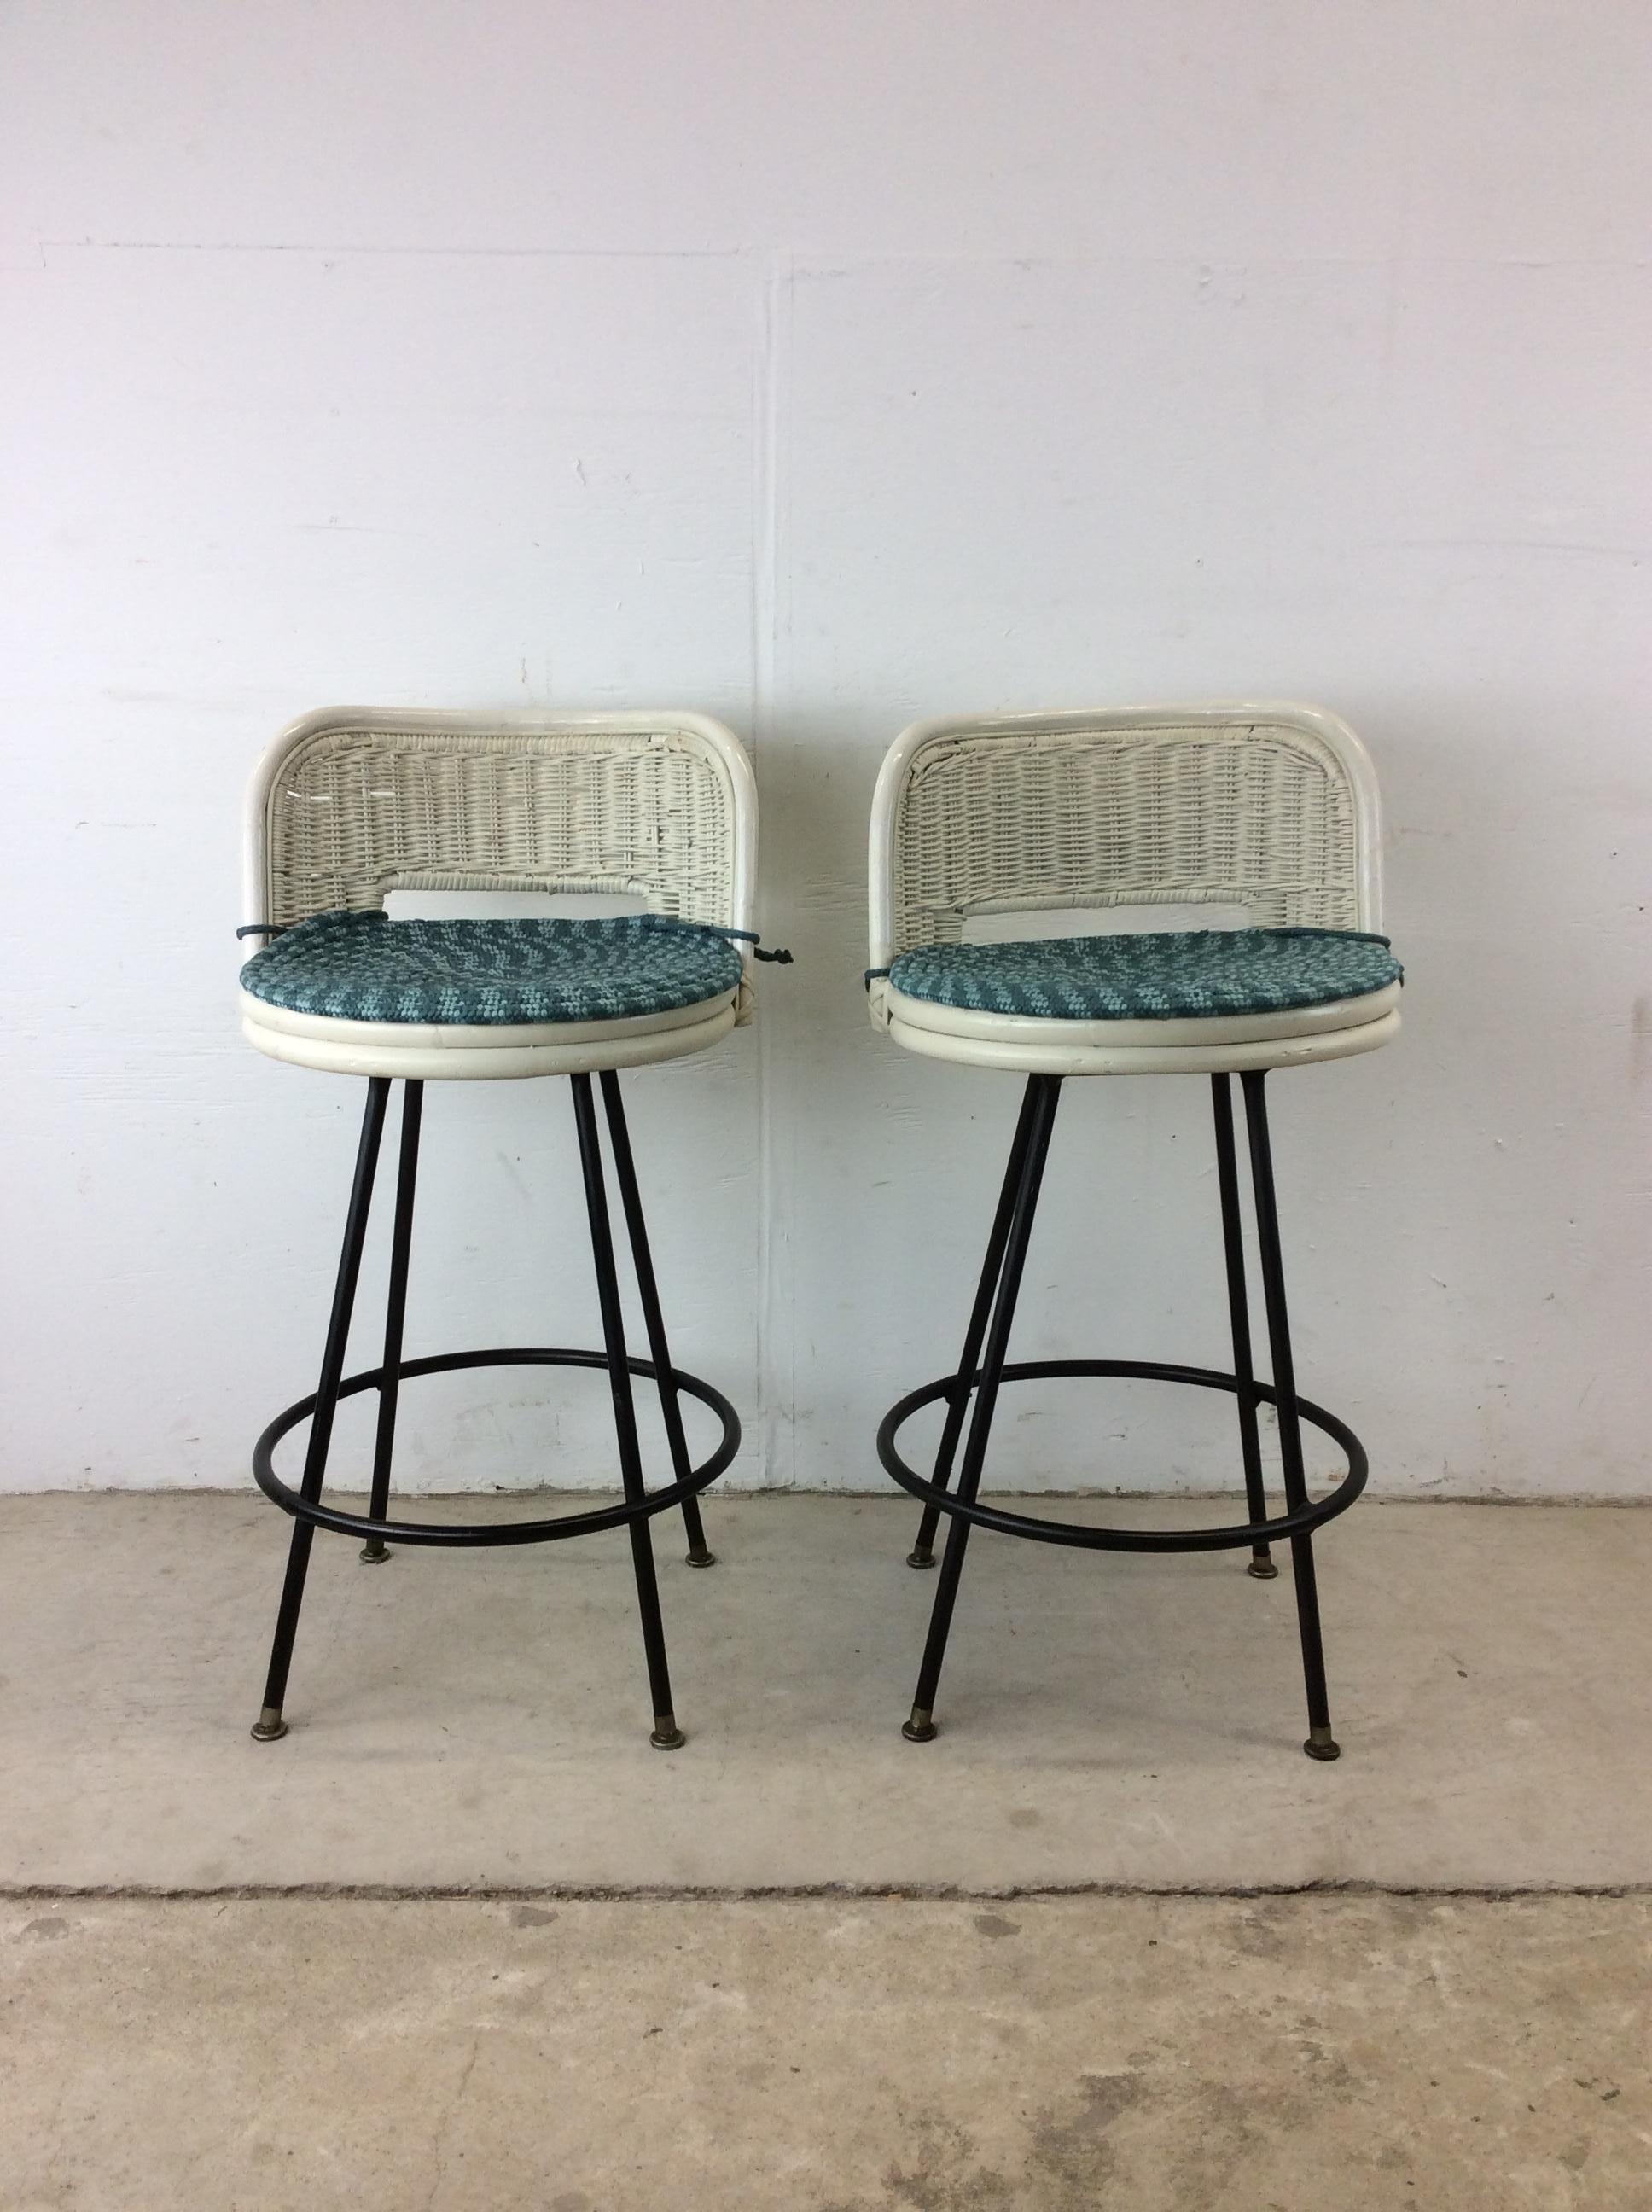 American Mid Century Modern White Wicker Bar Stools For Sale